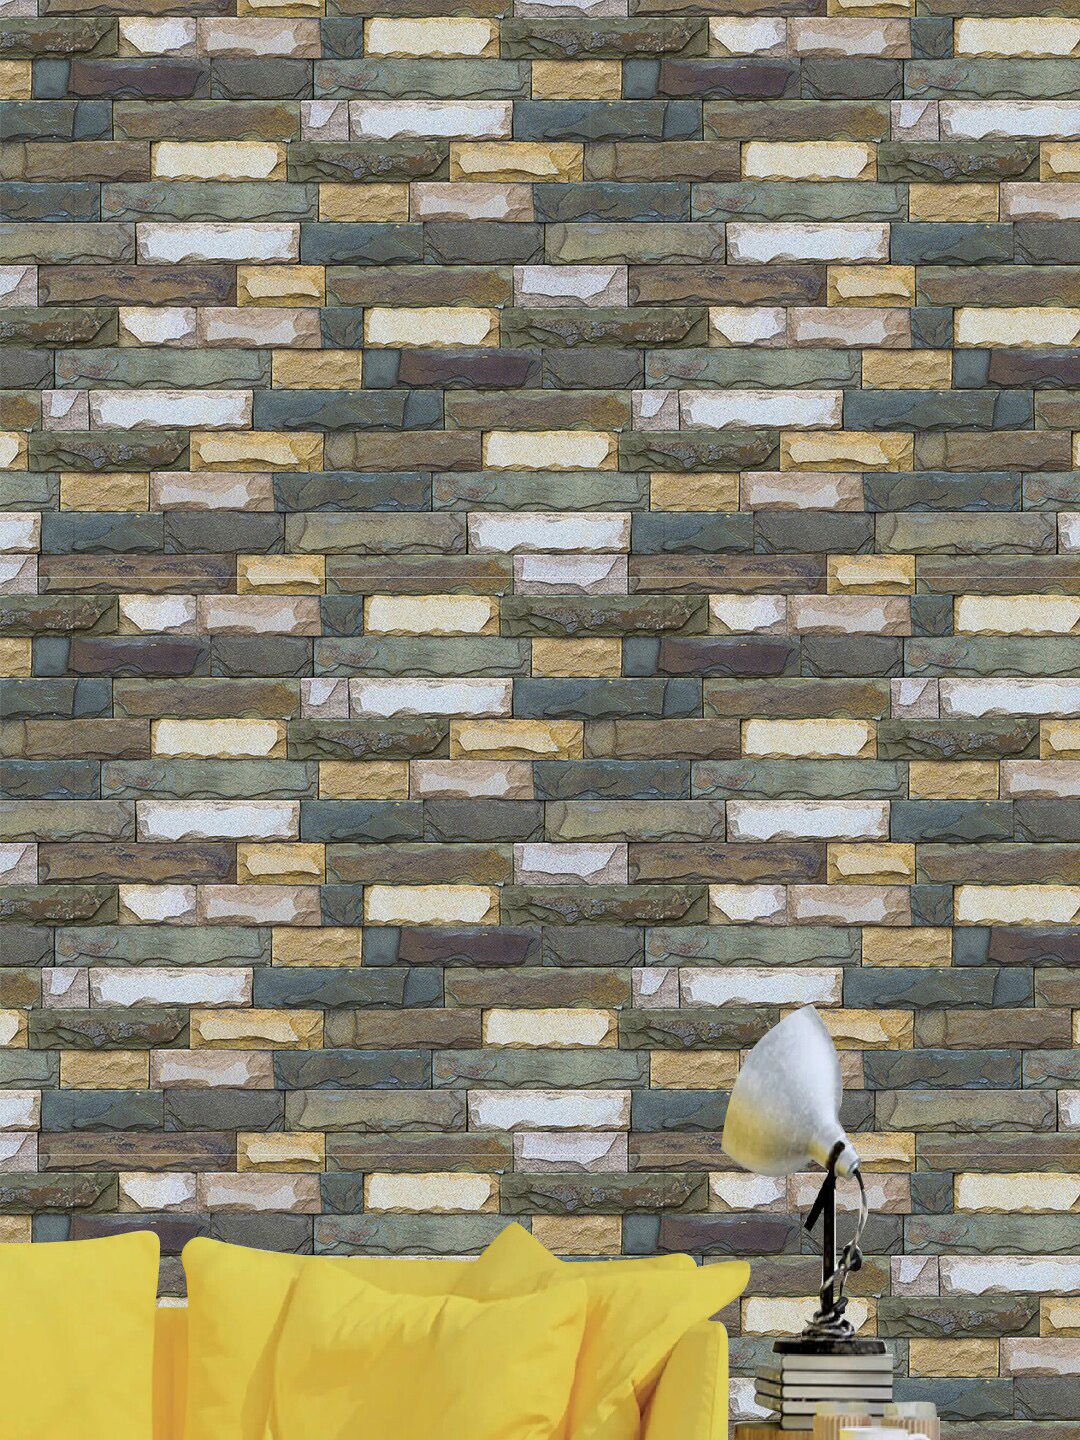 Jaamso Royals Multicolored 3D Stone Brick Wallpaper Price in India